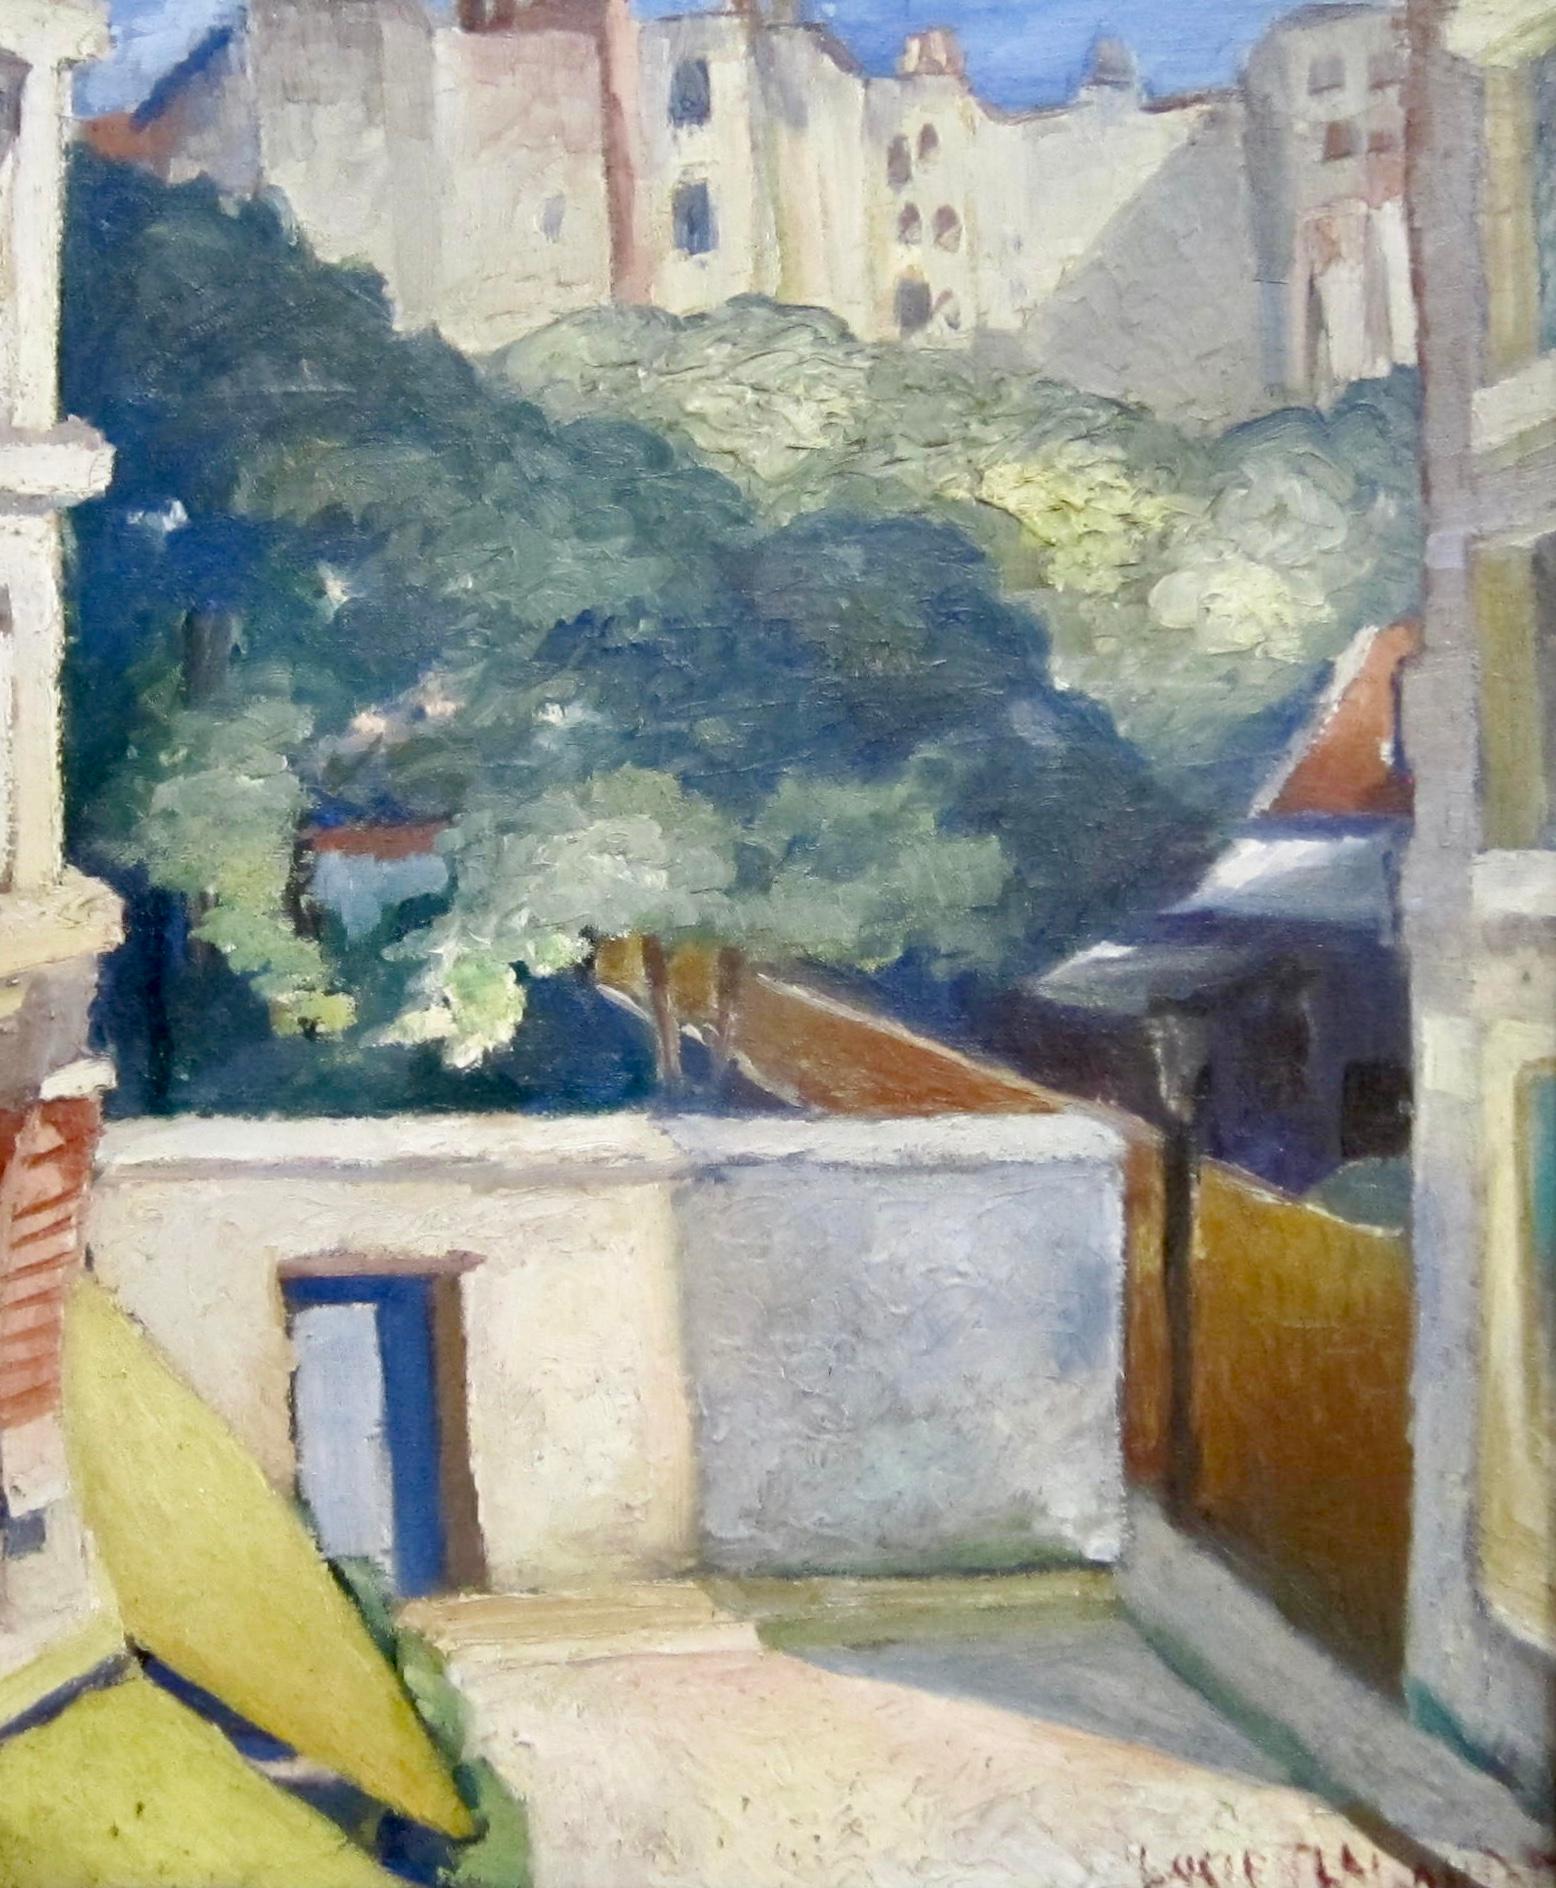 Nice modernist oil painting of a Paris street scene dated 1924 by Lucien Labaudt titled 'Rue Frederick Lemaitre, Belleville, Paris '24'.
About the artist: Lucien Labaudt, (Californa/France 1880-1943), was born in Paris, France on May 14, 1880. 